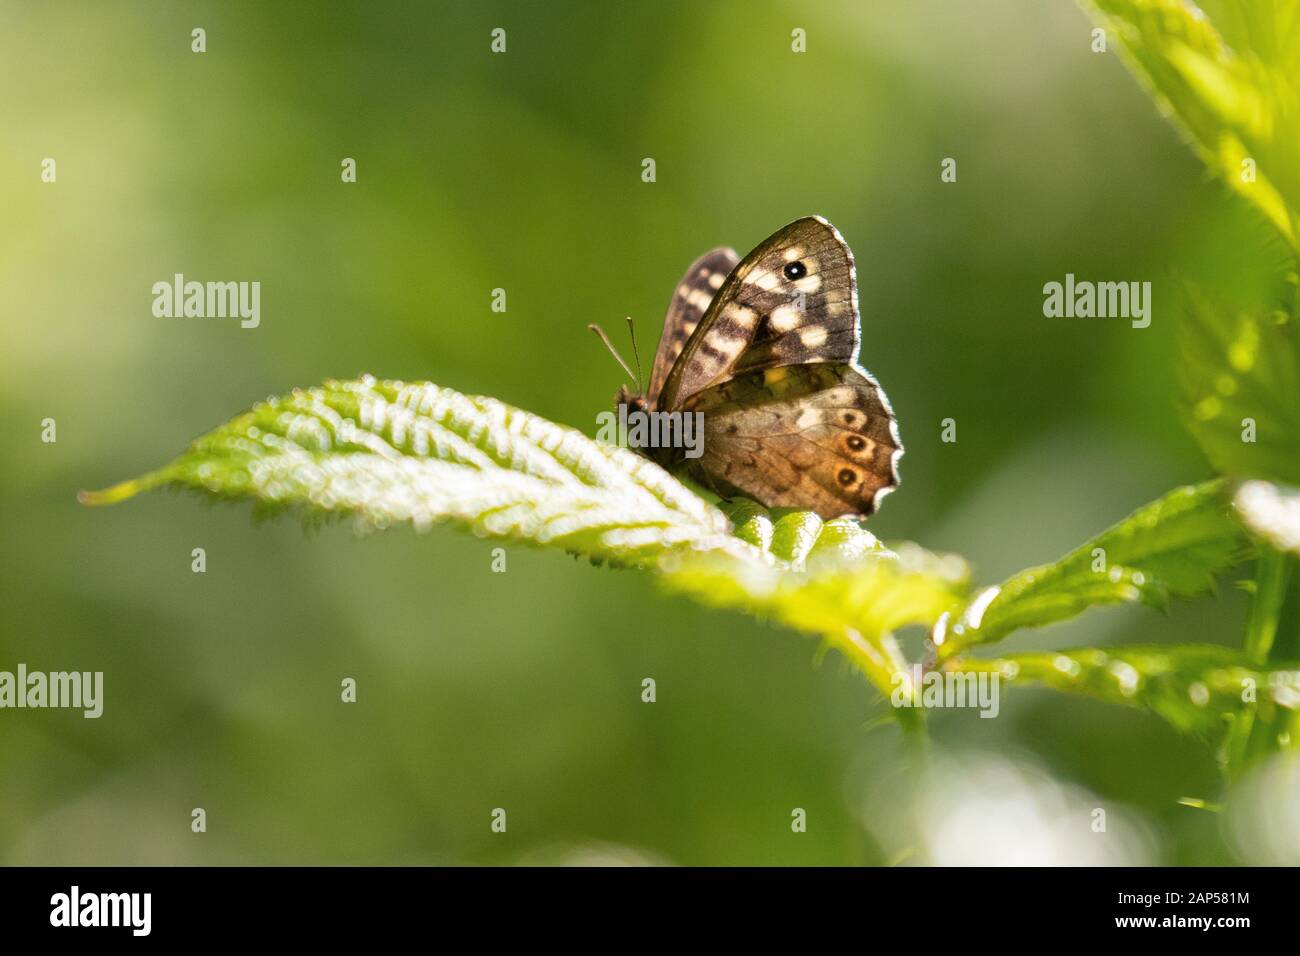 A speckled wood butterfly perched on a bramble leaf in bright sunlight Stock Photo